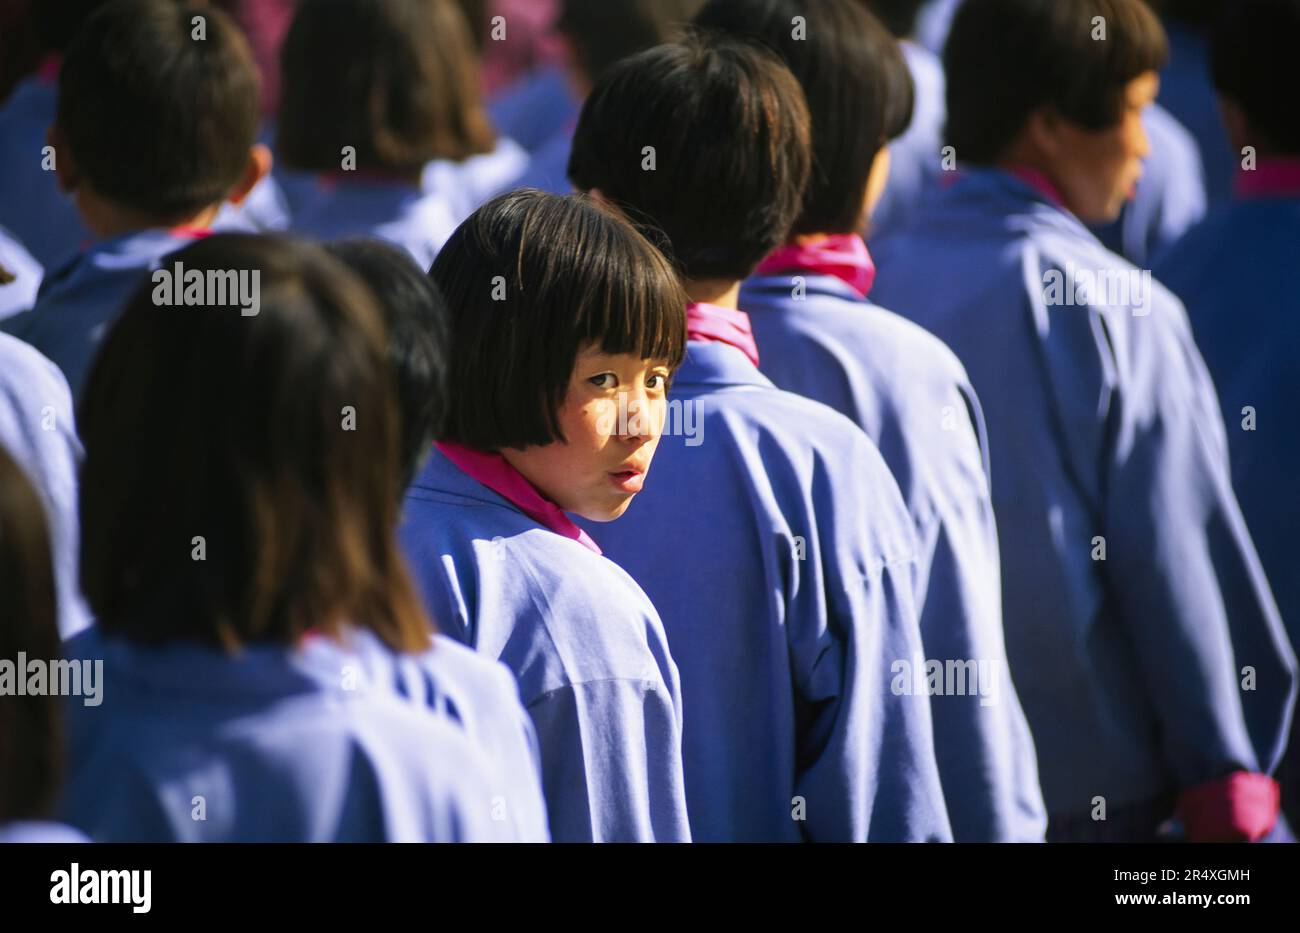 Bhutanese children stand in rows at a festival in Thimphu; Thimphu, Bhutan Stock Photo